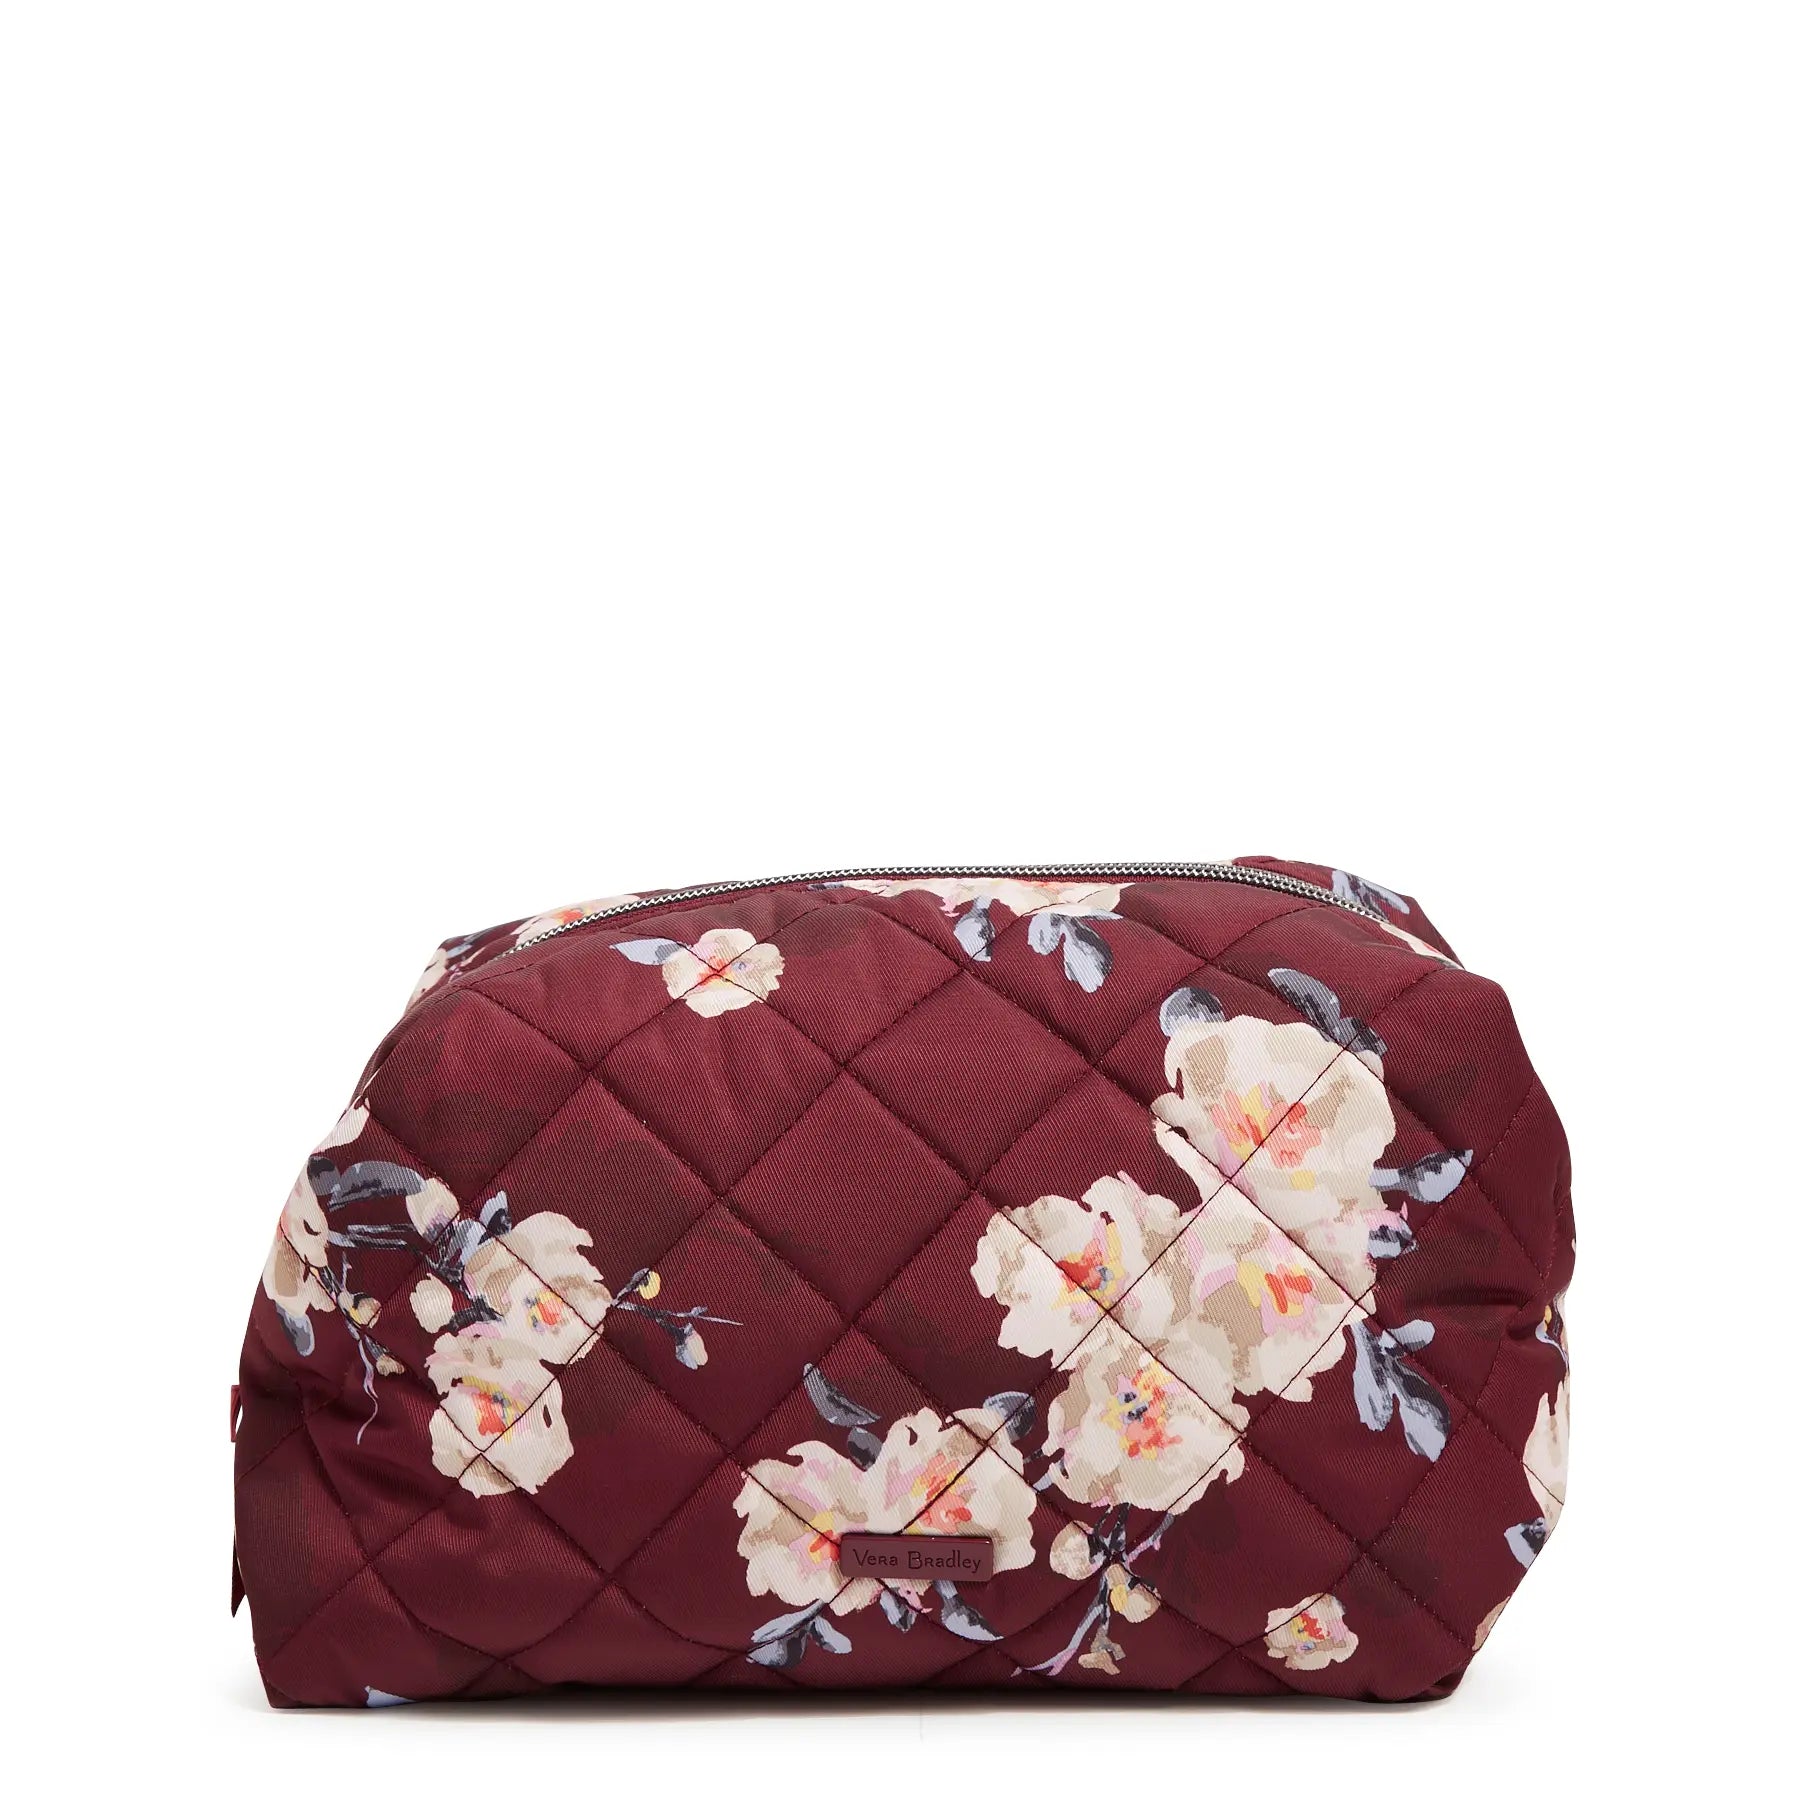 Vera Bradley Large Cosmetic in Blooms and Branches.